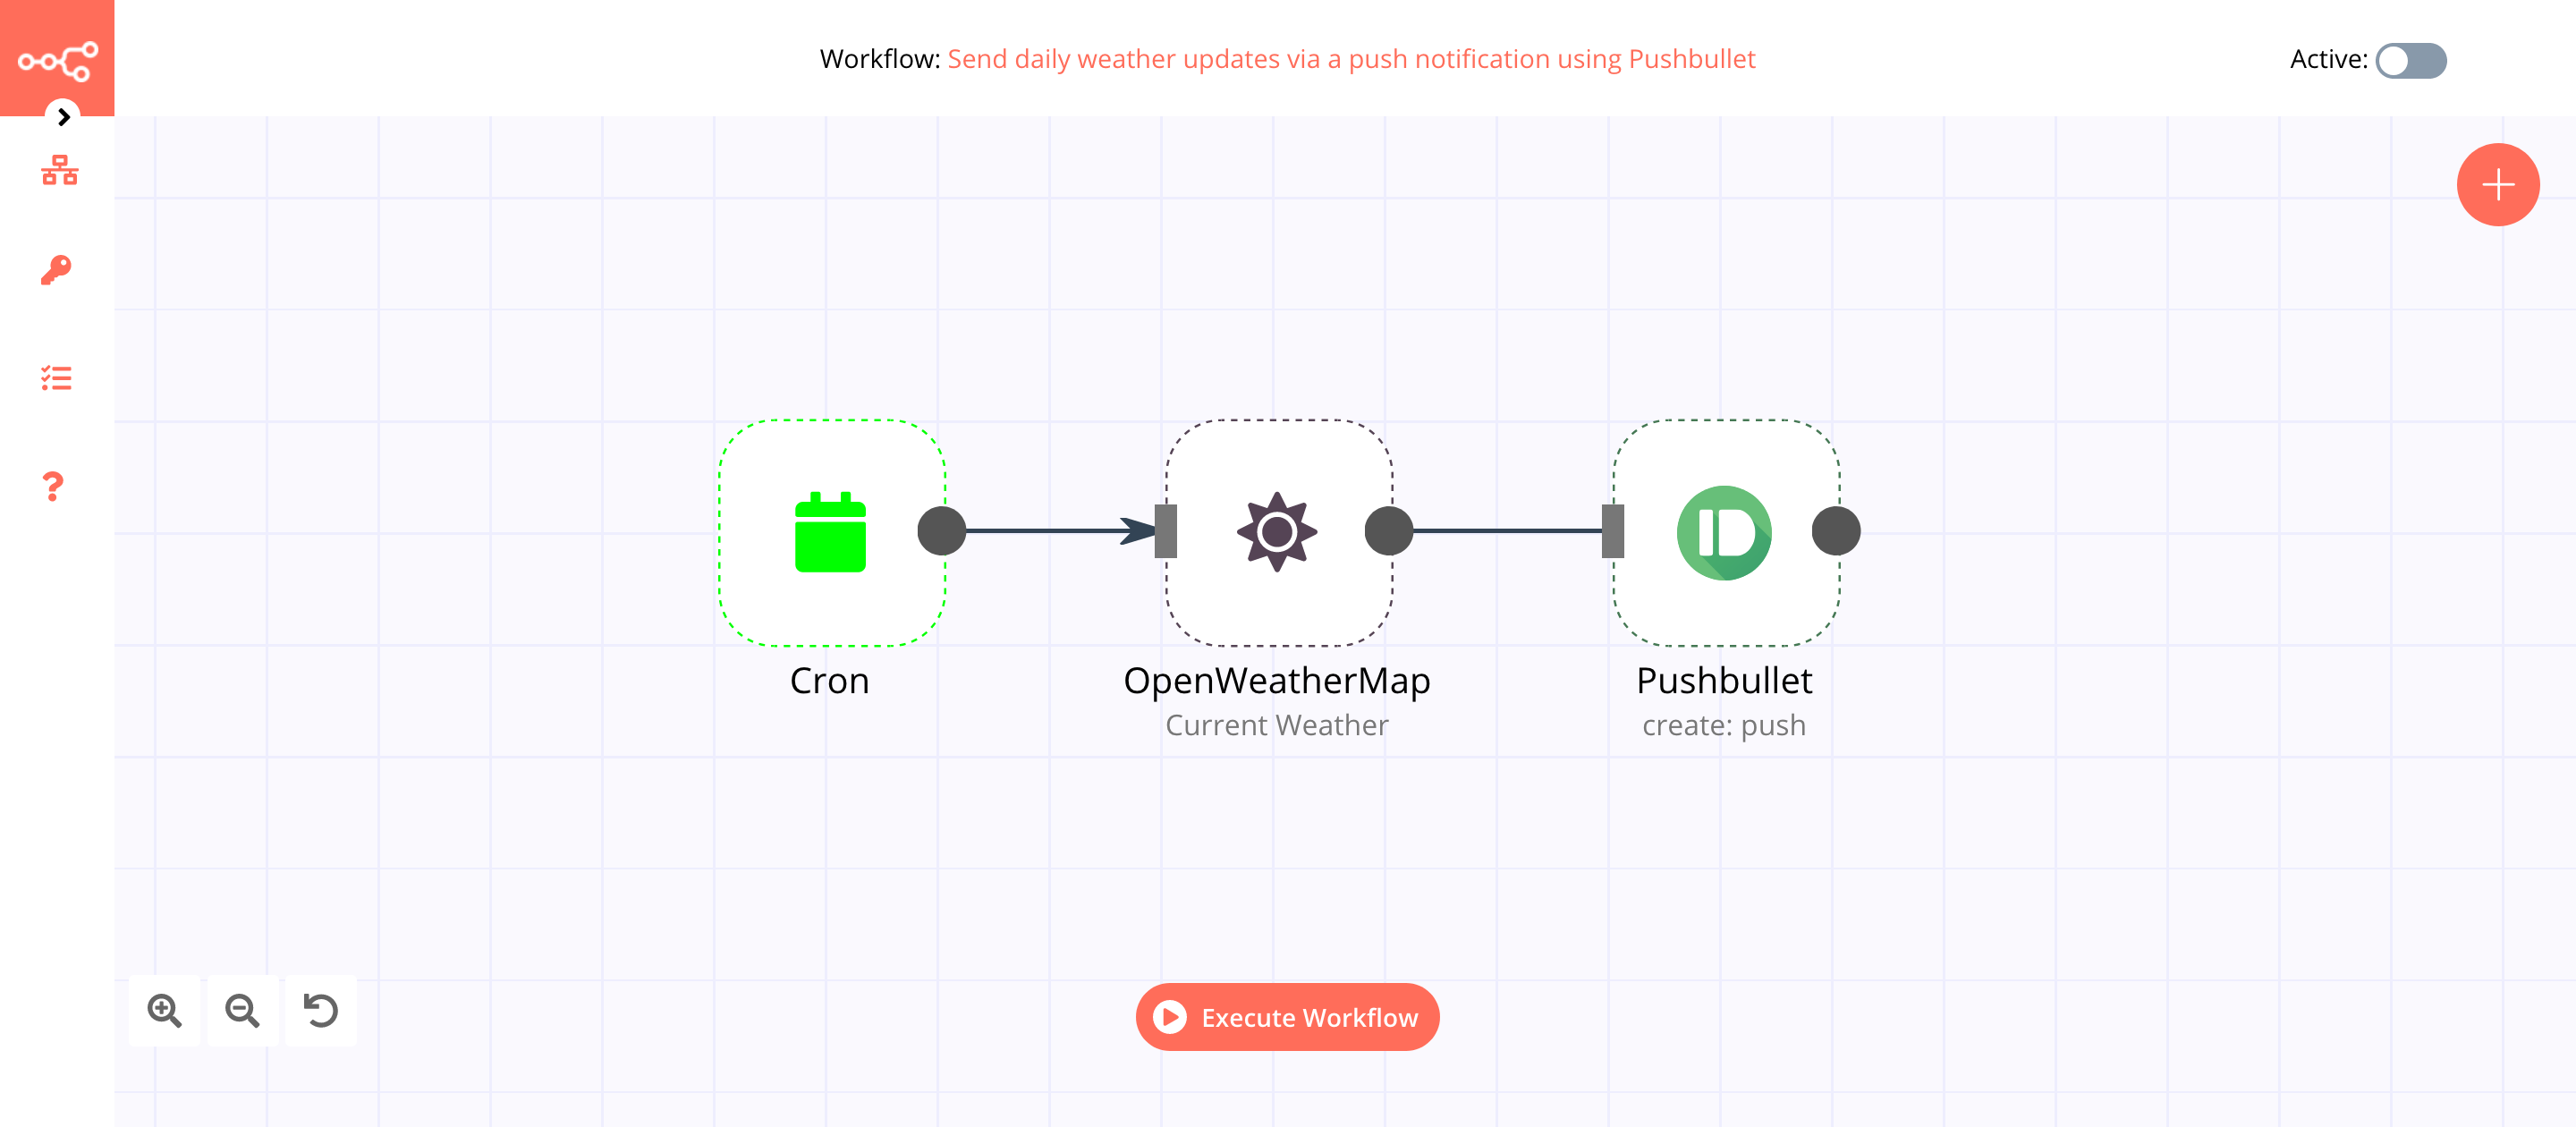 A workflow with the Pushbullet node